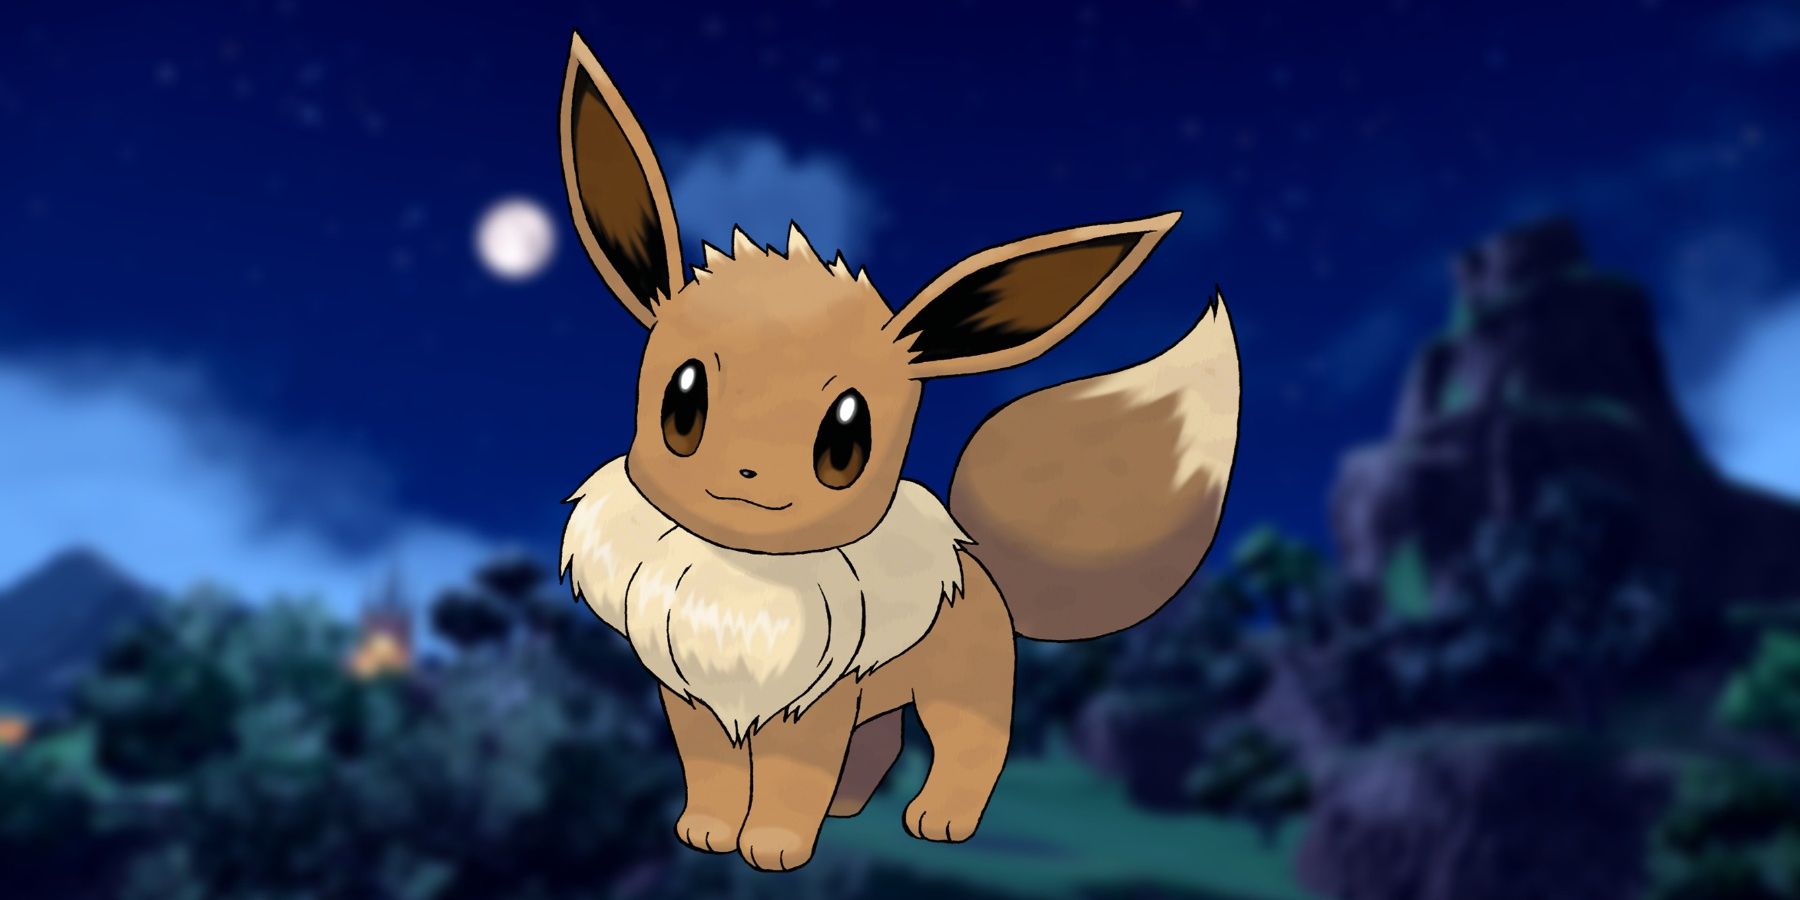 Pokemon Fan Art Imagines Eevee and Its Evolutions as Humans